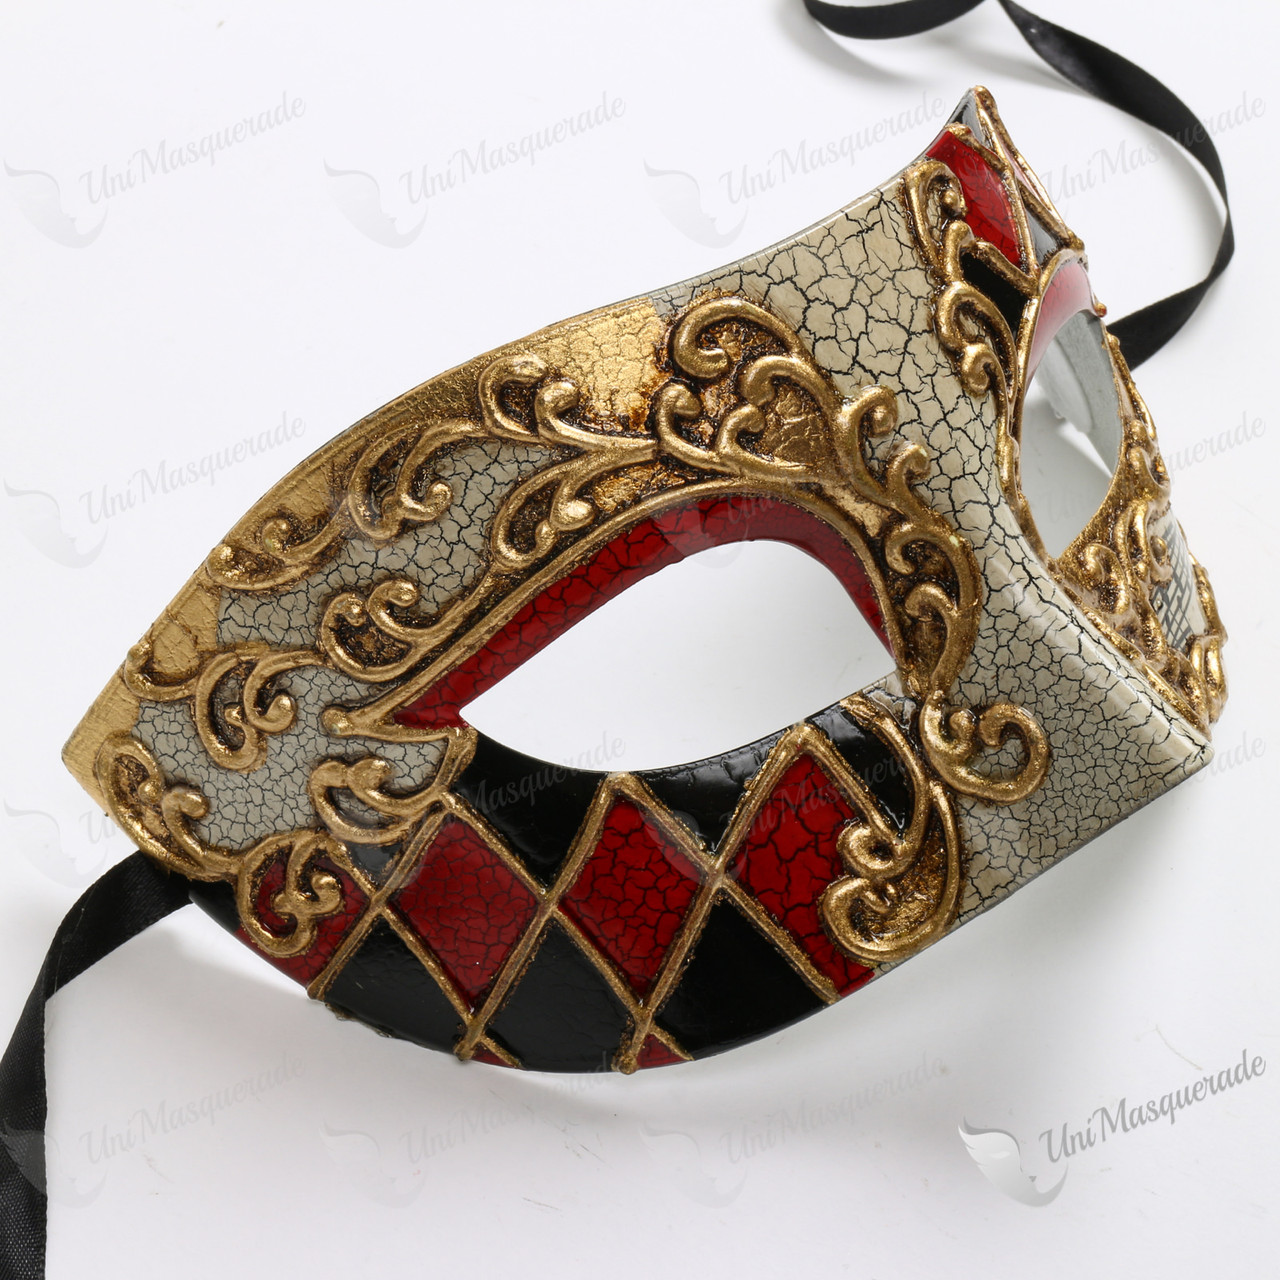 Colombina Venetian Musical Red Diamond Pattern Crackle Masquerade Mask